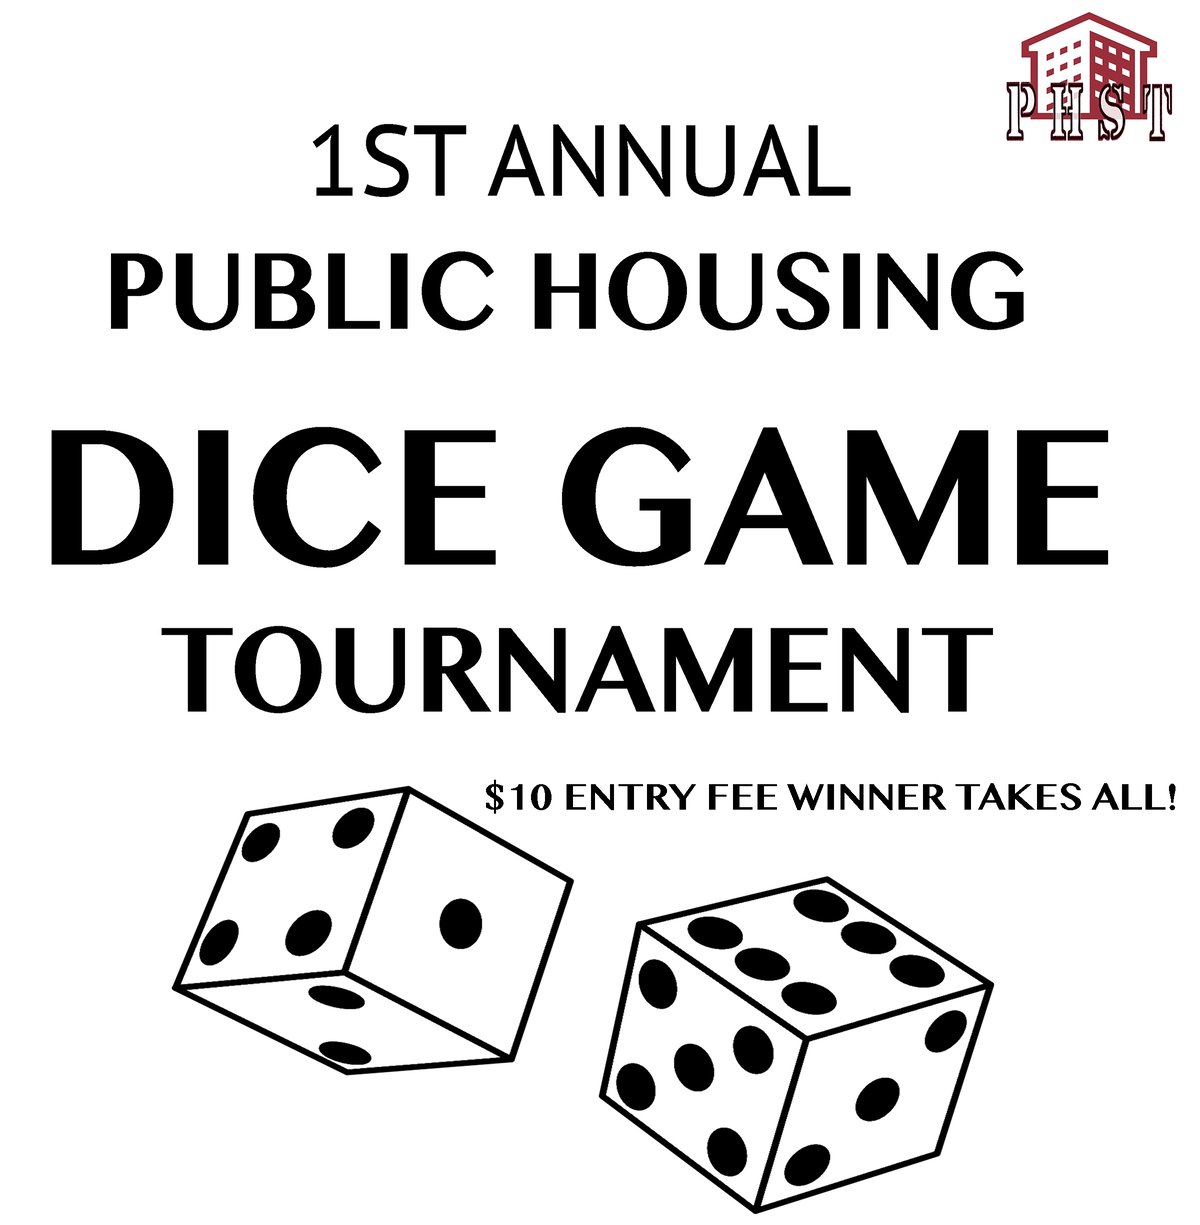 Image of WHITE DICE GAME TOURNAMENT T-SHIRT 